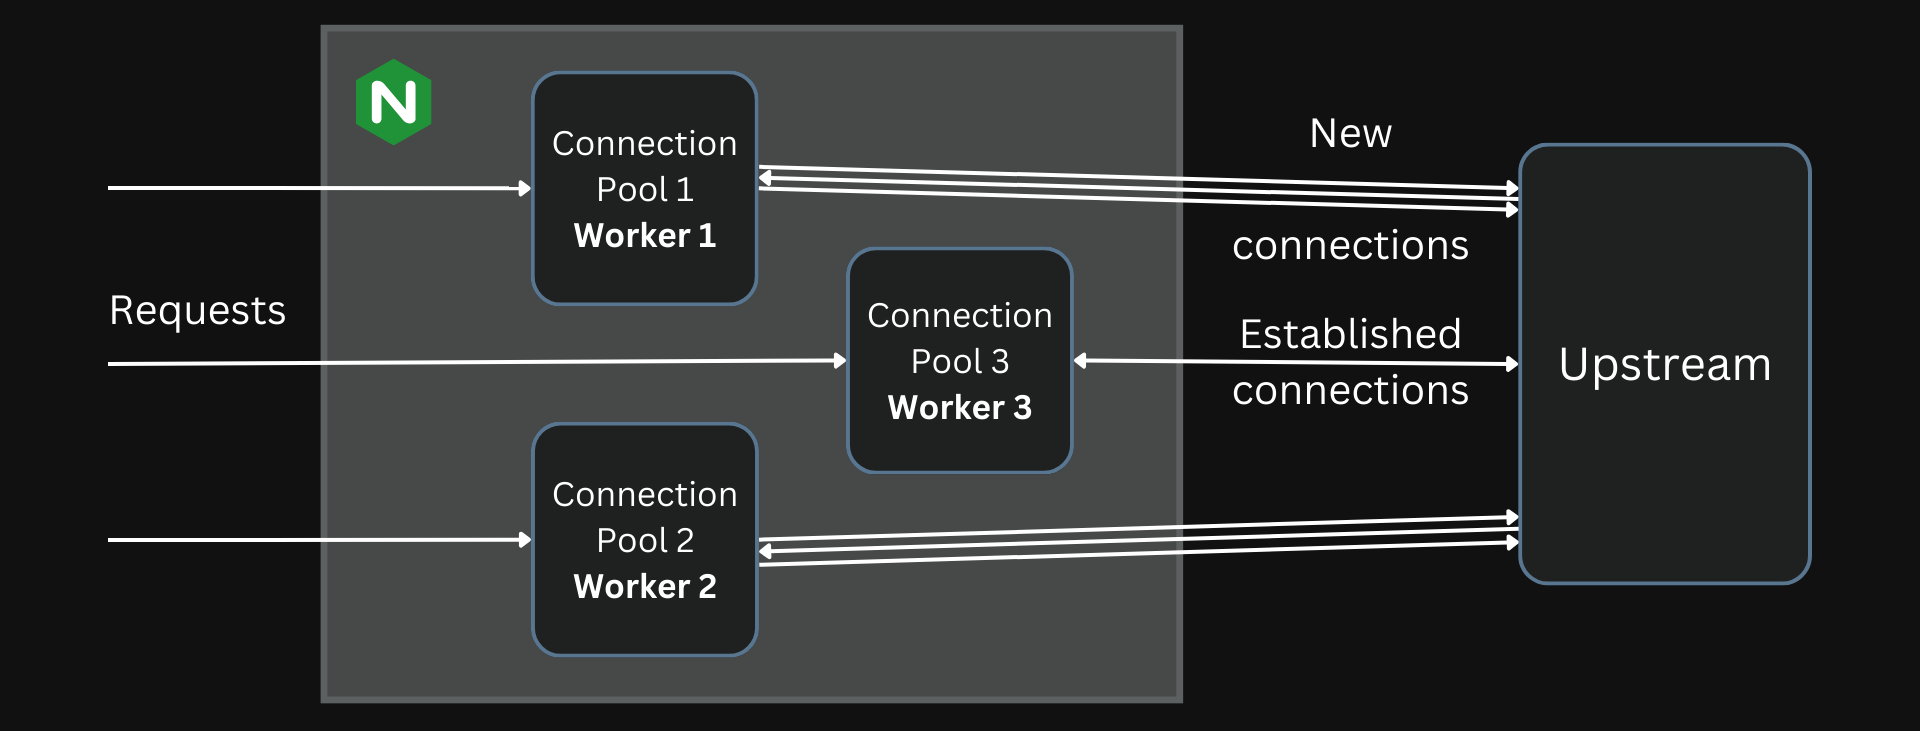 Connection Pools in Nginx